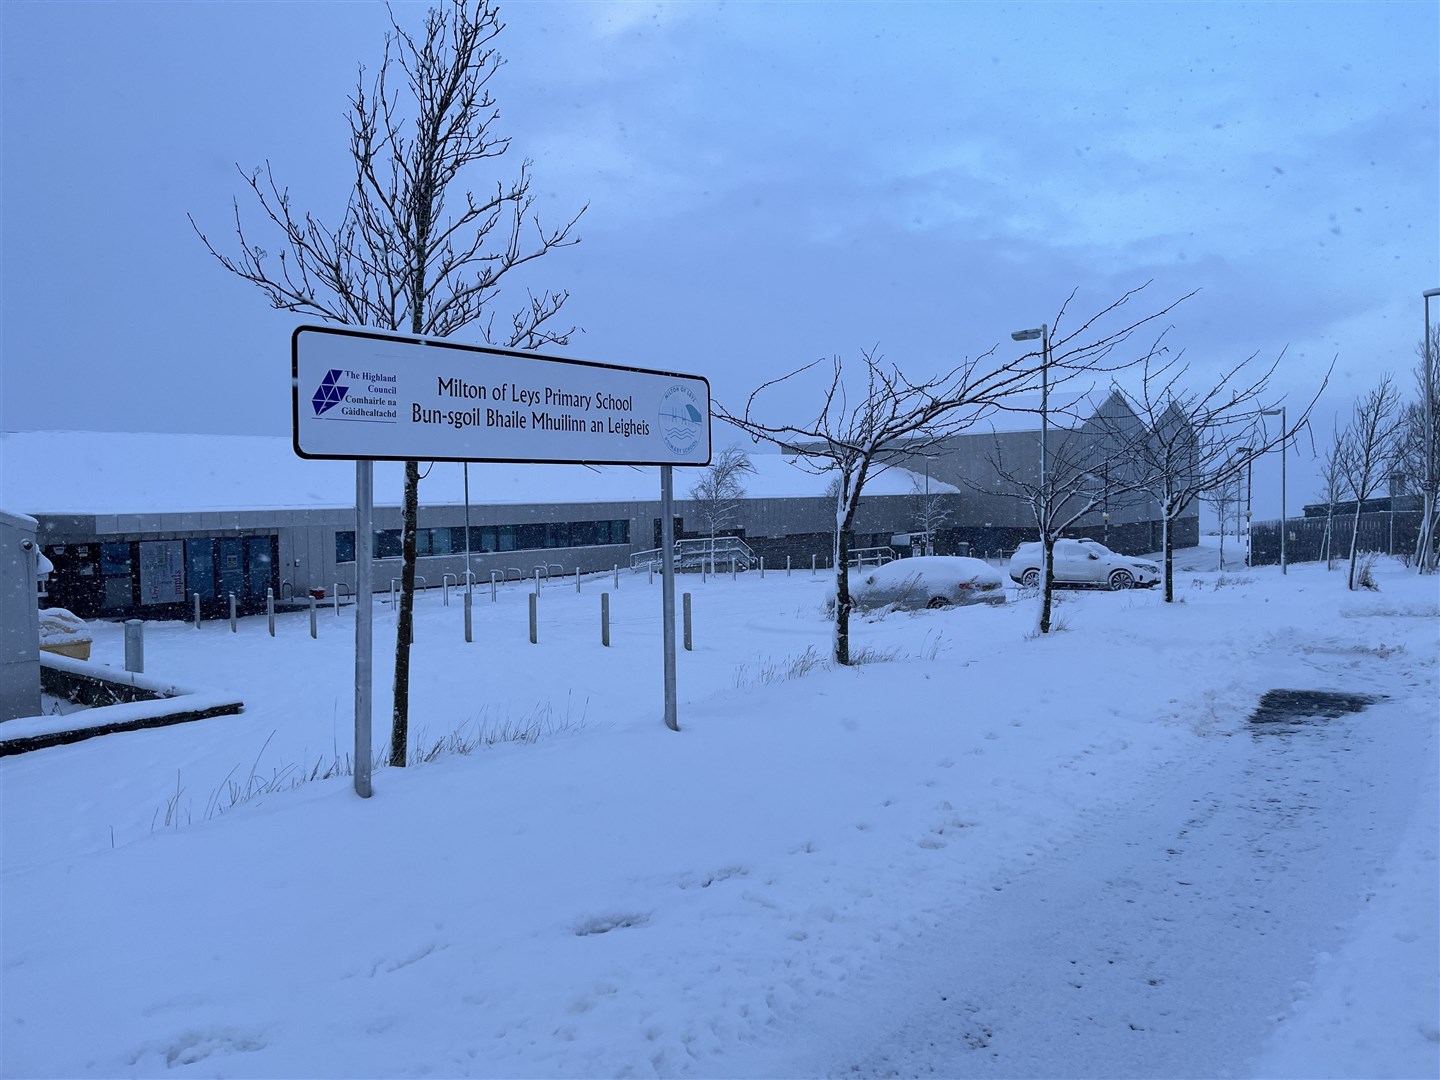 Milton of Leys Primary School in Inverness which is closed due to the bad weather..